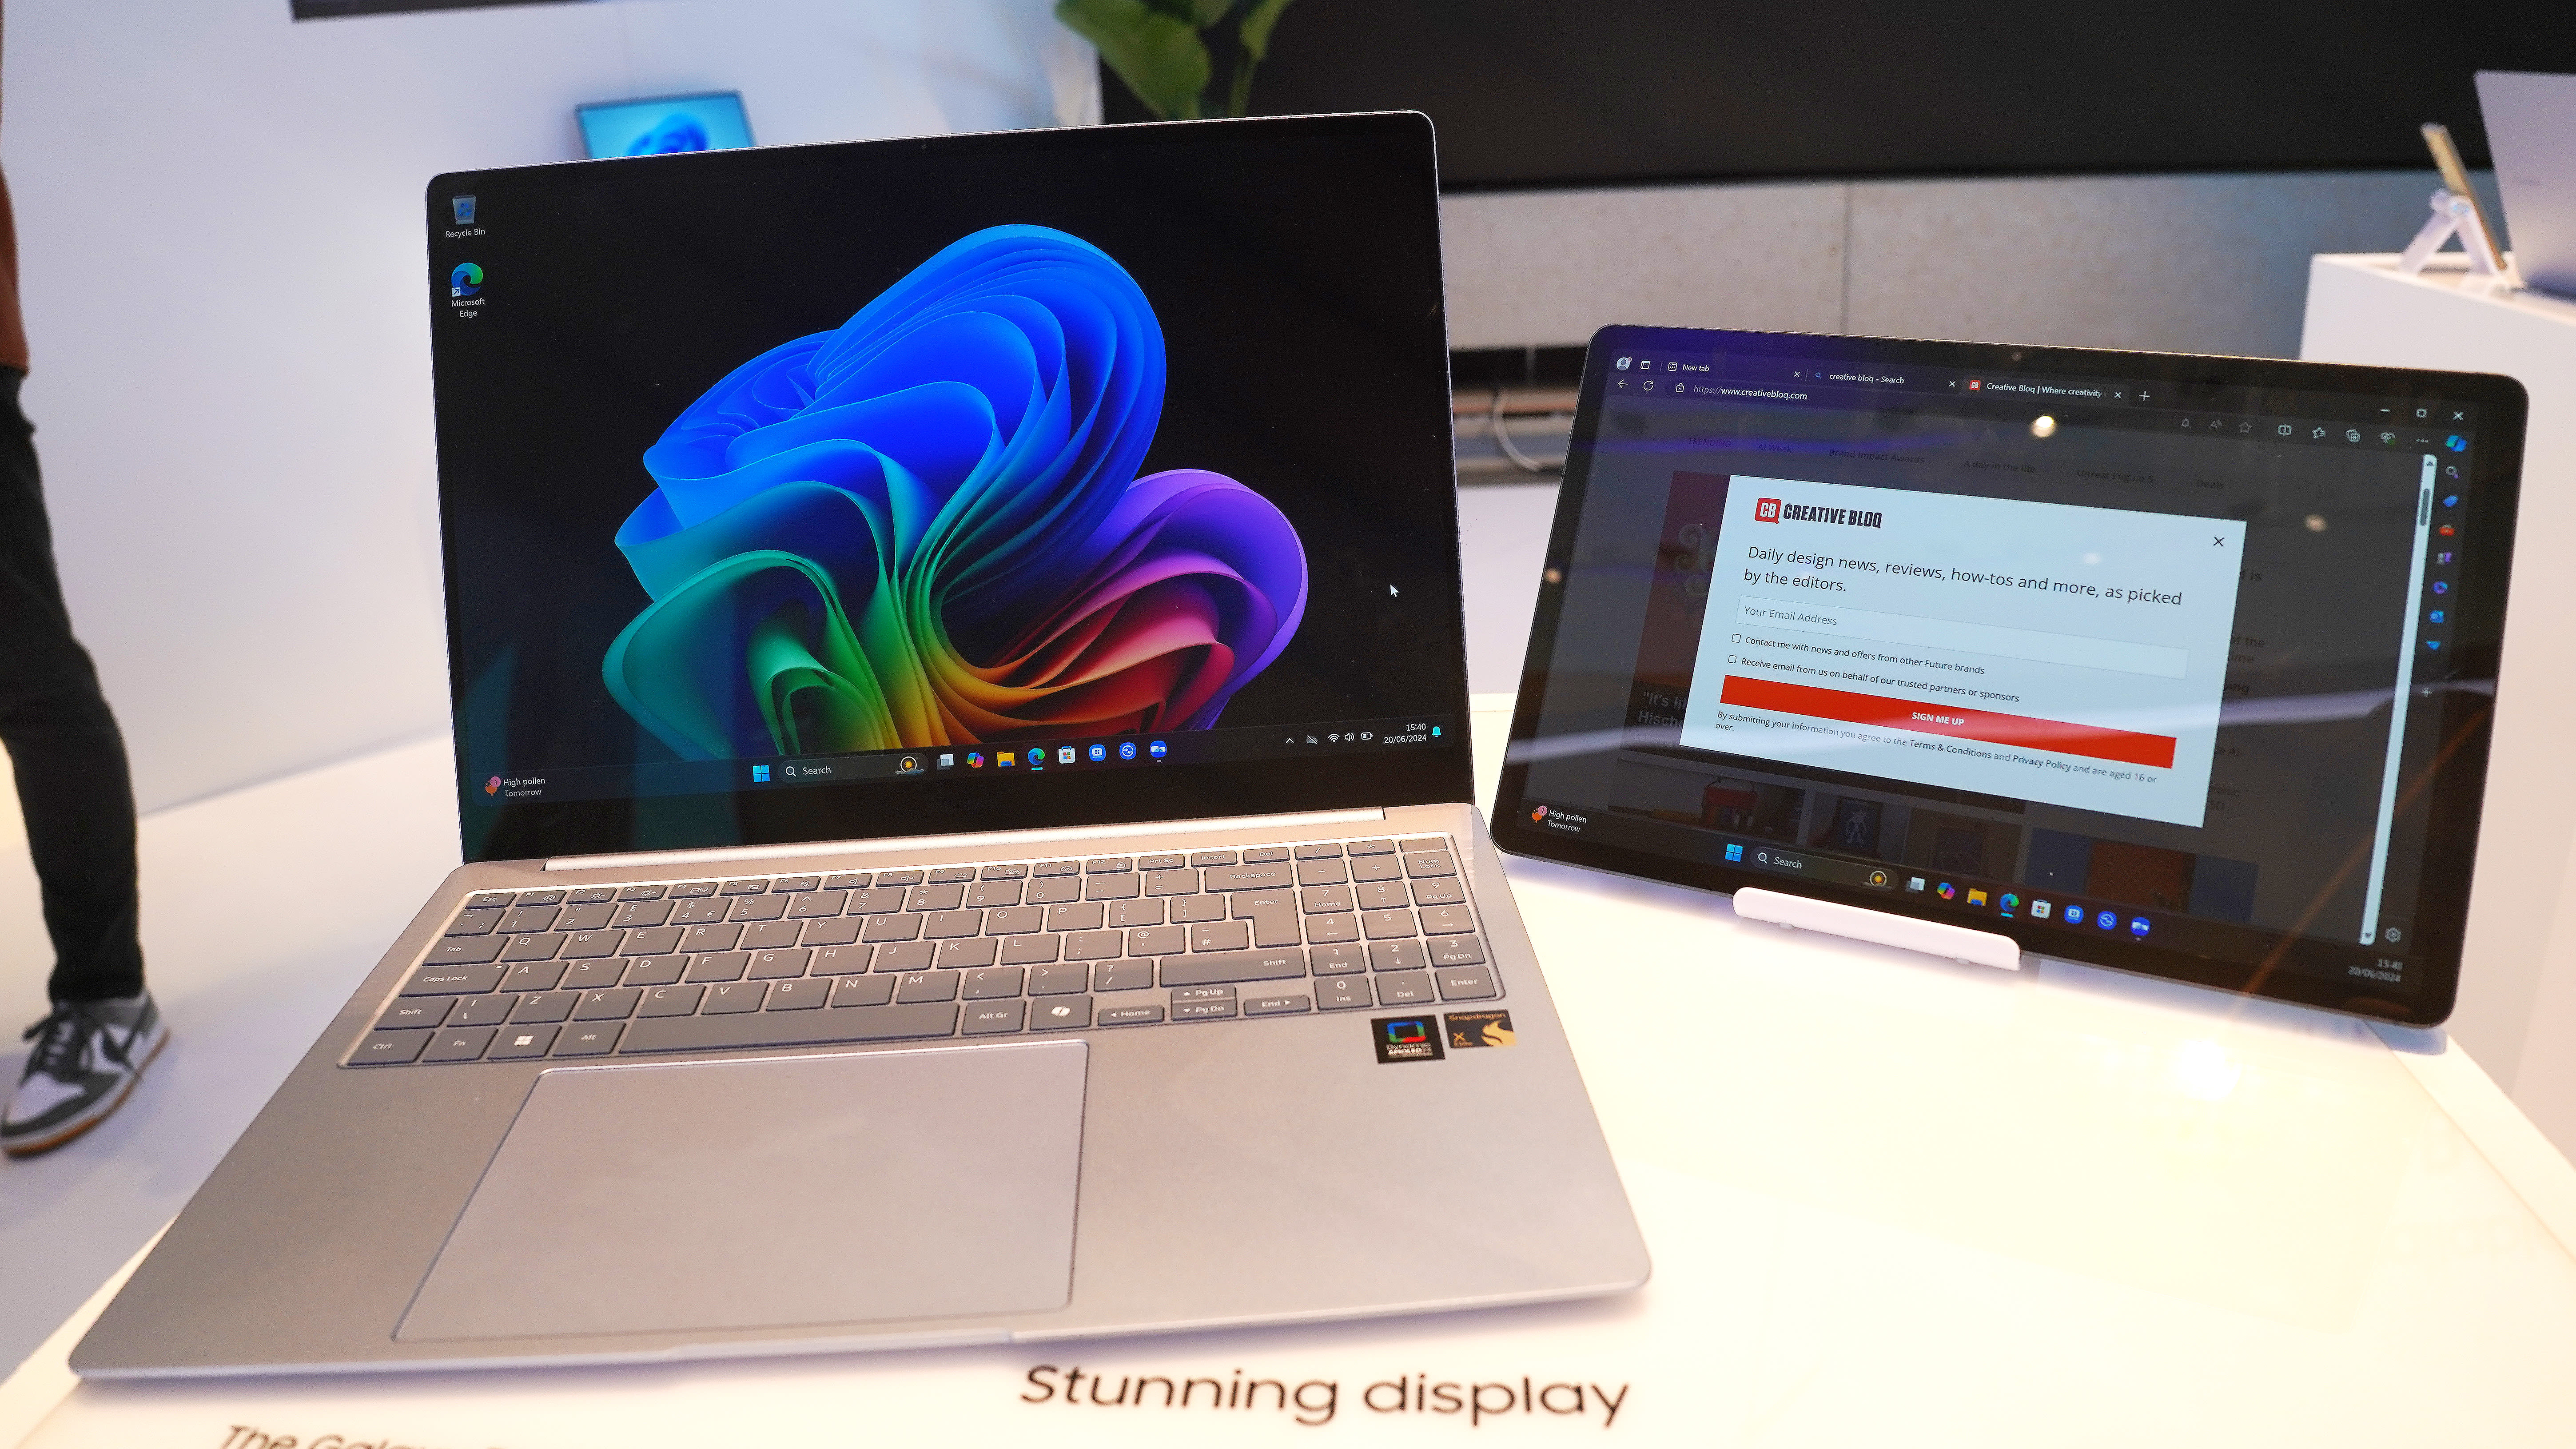 I tried Samsung's new Galaxy Book4 Edge – Spoiler alert: it's awesome